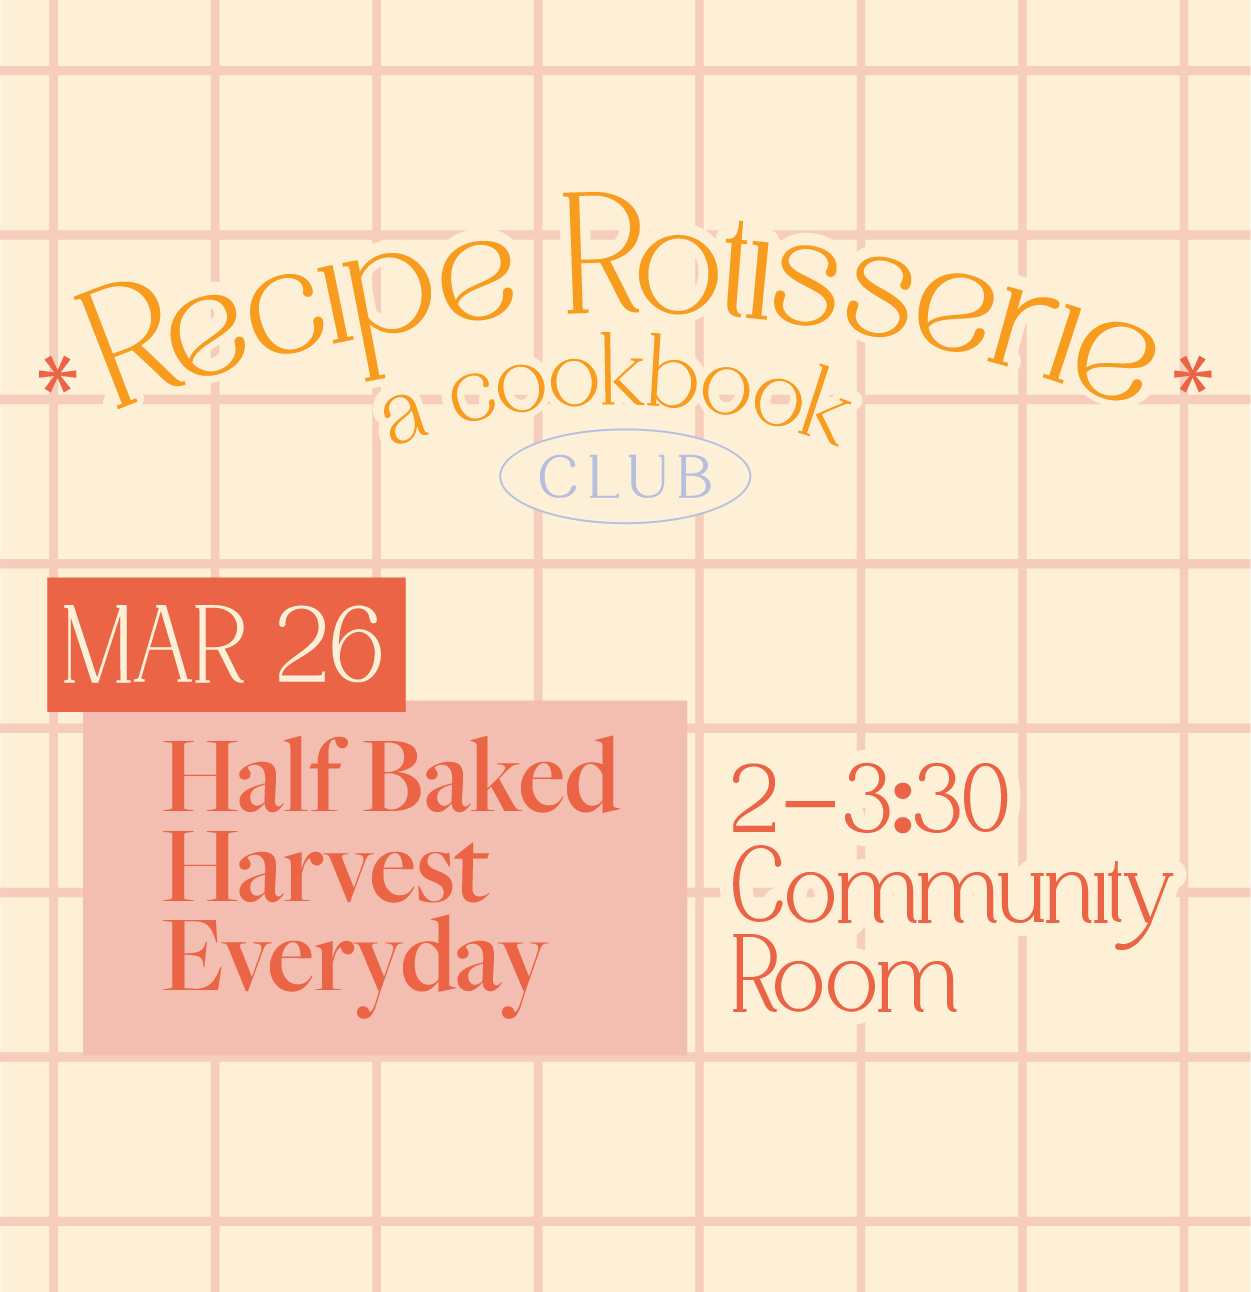 Recipe Rotisserie a cookbook club March 26 Half Baked Harvest Everyday 2–3:30 Community Room